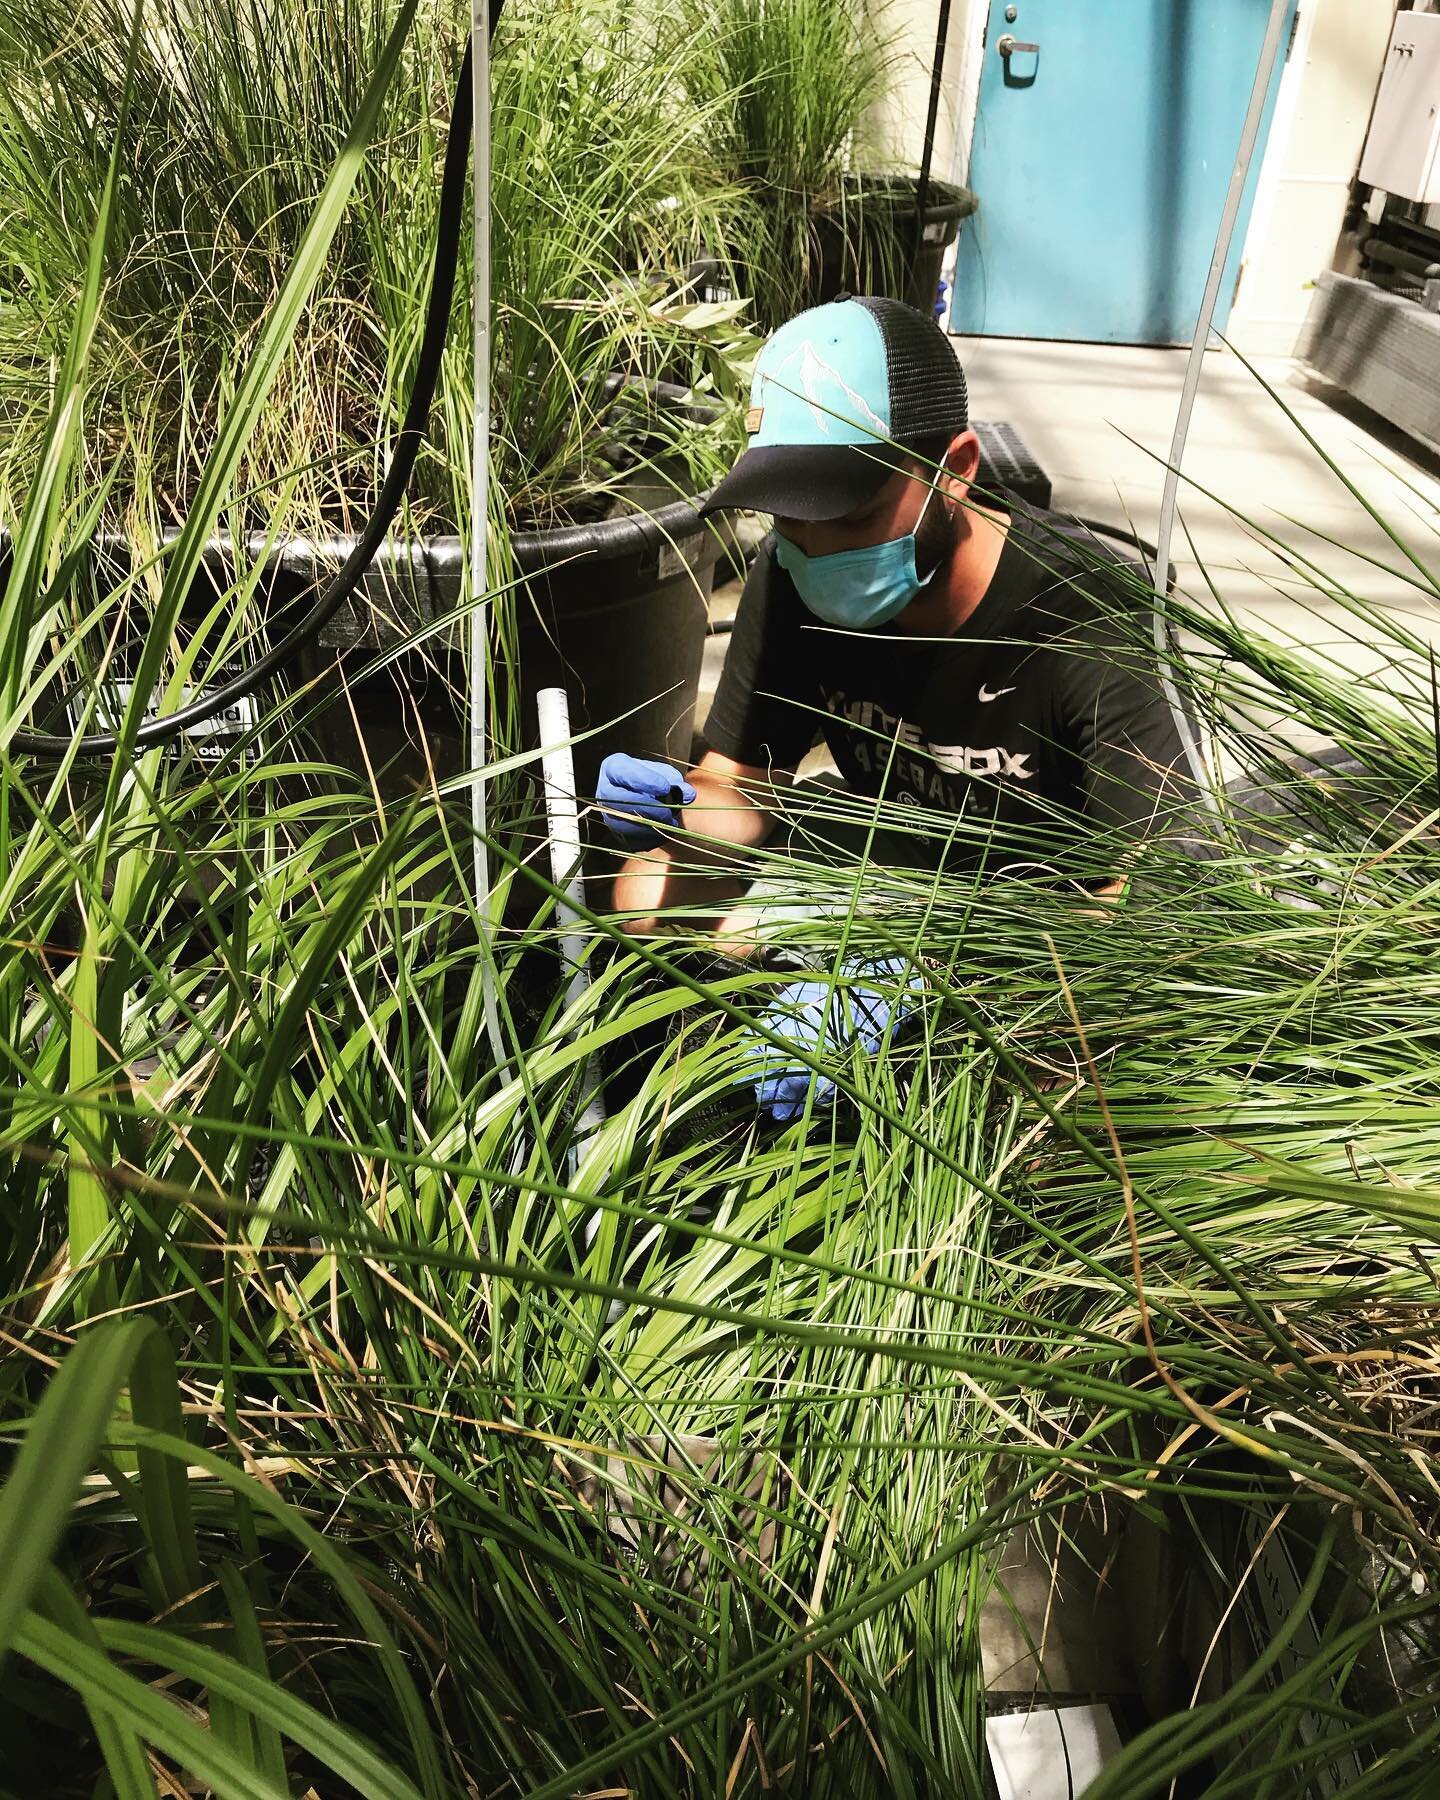 Yesterday MESOLab PhD student Matt started his first #floatingtreatmentwetland mesocosm experiment! Mesocosm experiments allow us to study #floatingtreatmentwetlands in a controlled setting. To learn more about our research, visit the link in our bio